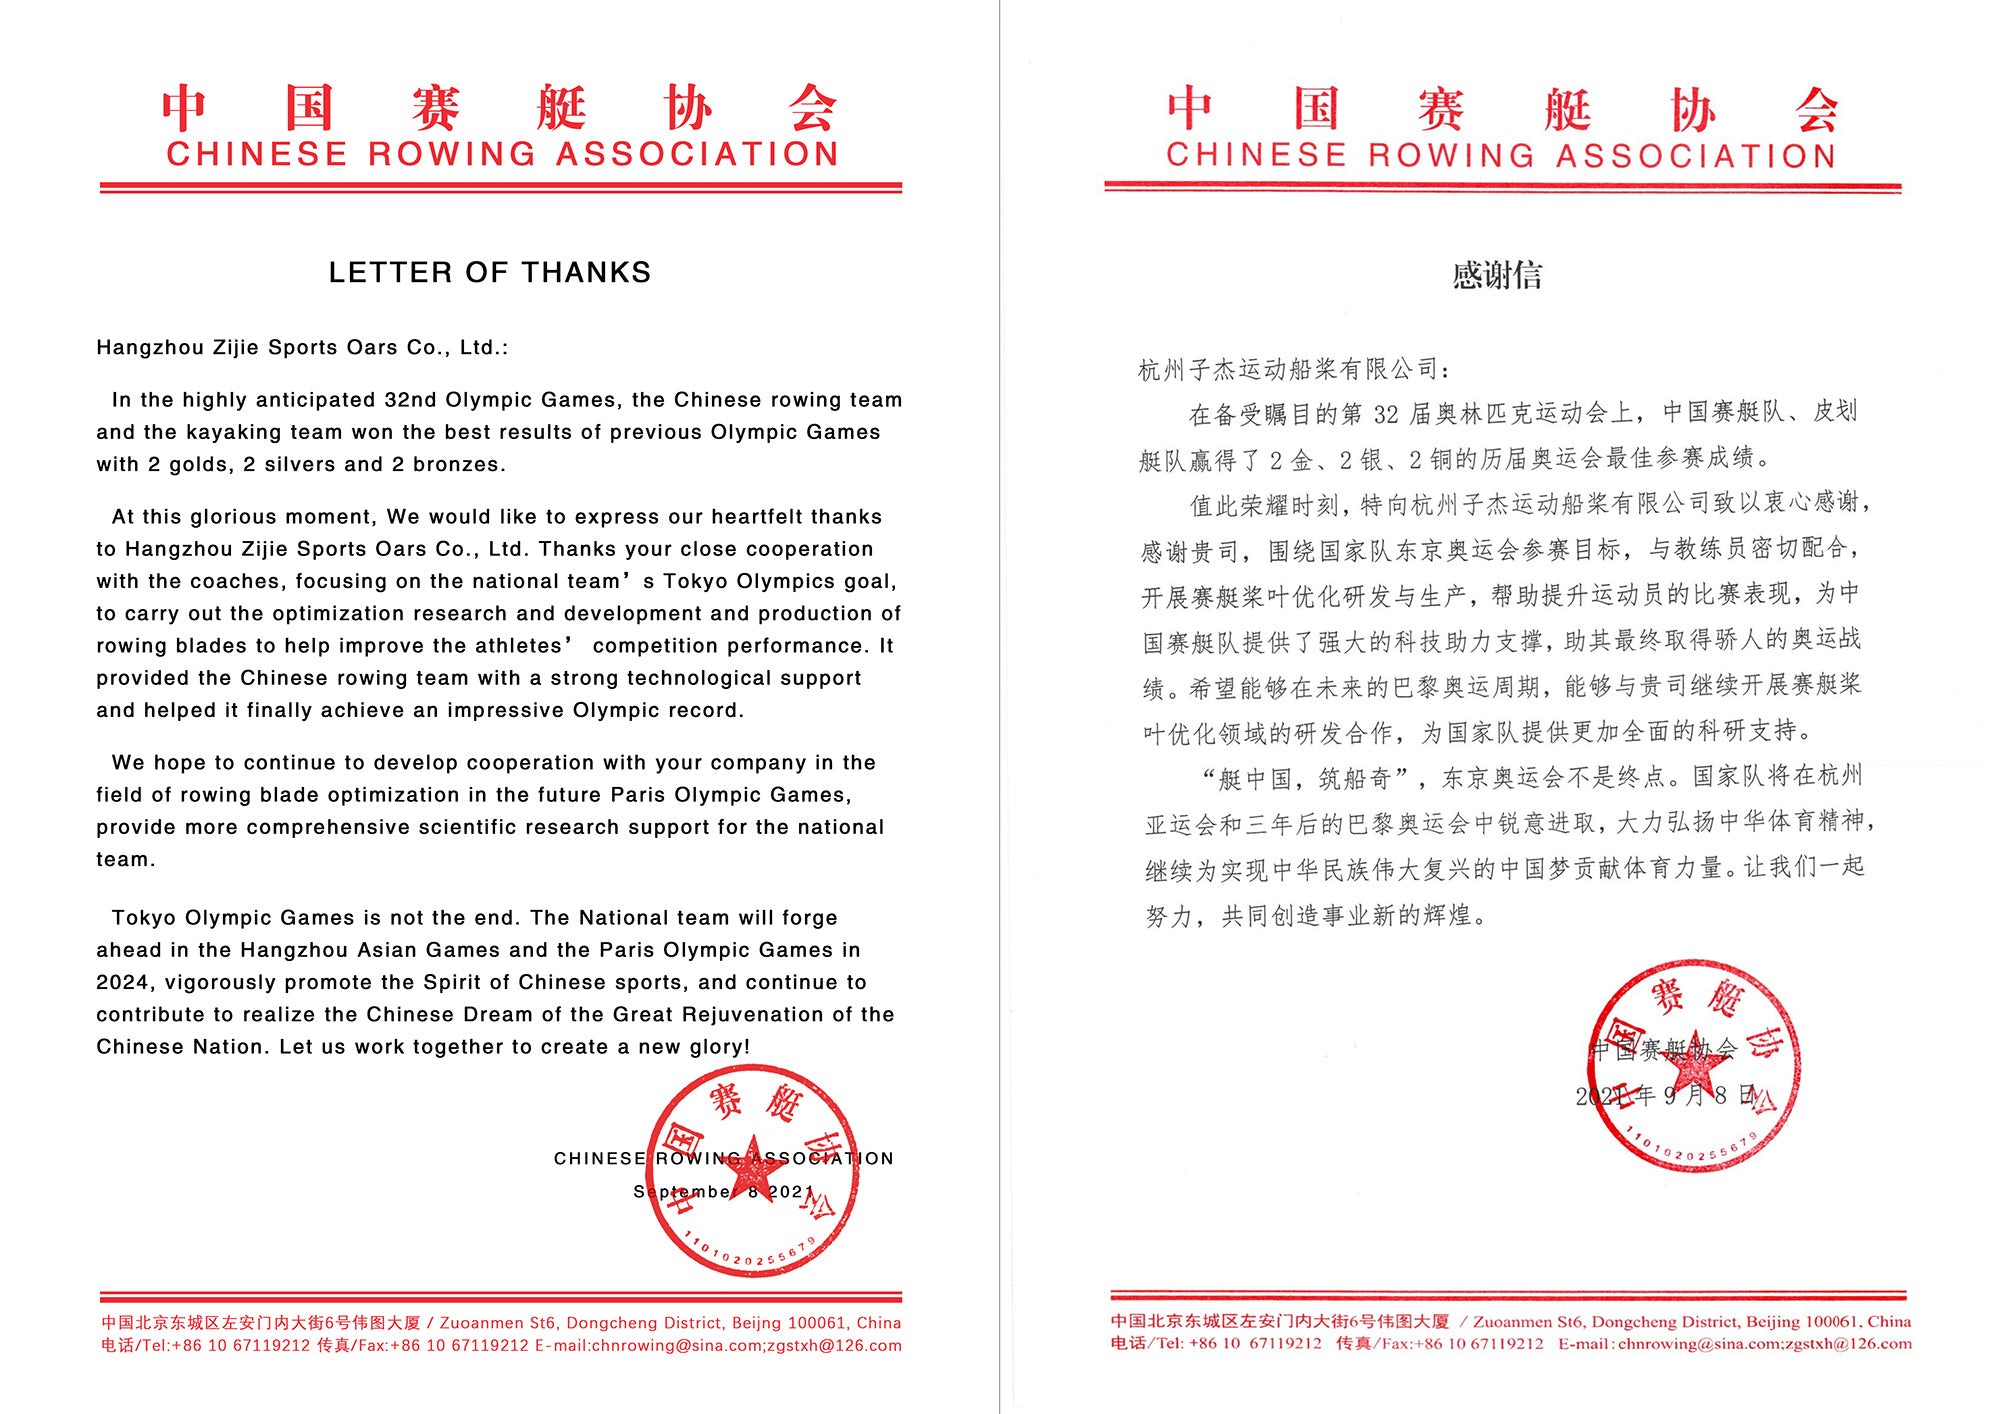 A Letter of Thanks from Chinese Rowing Association